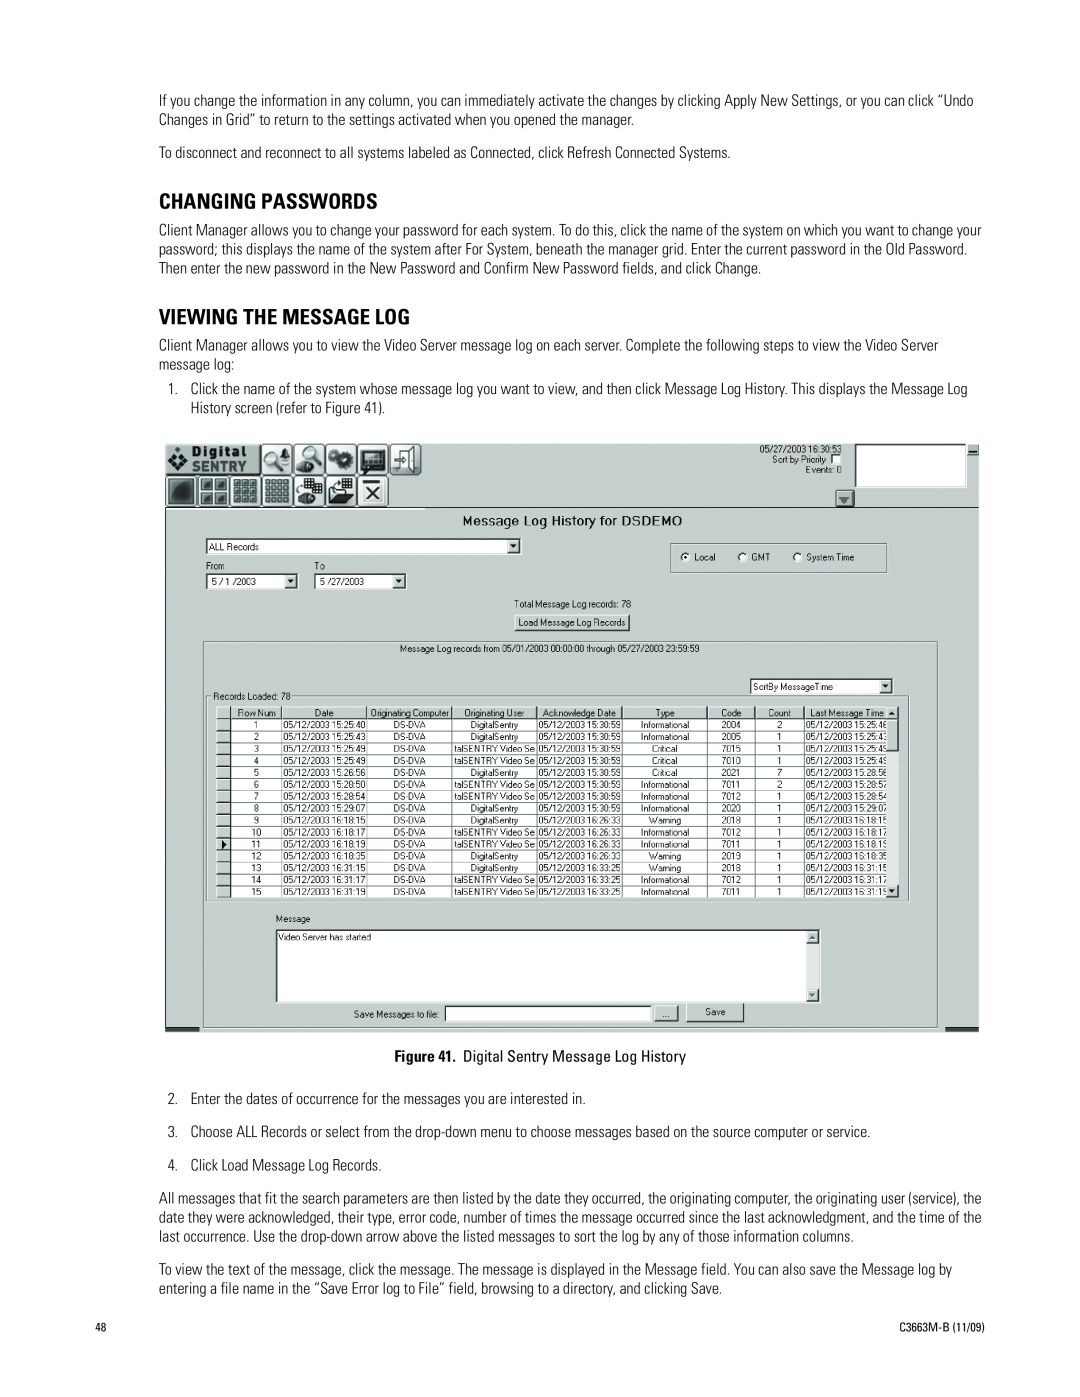 Pelco DS NVS manual Changing Passwords, Viewing The Message Log 